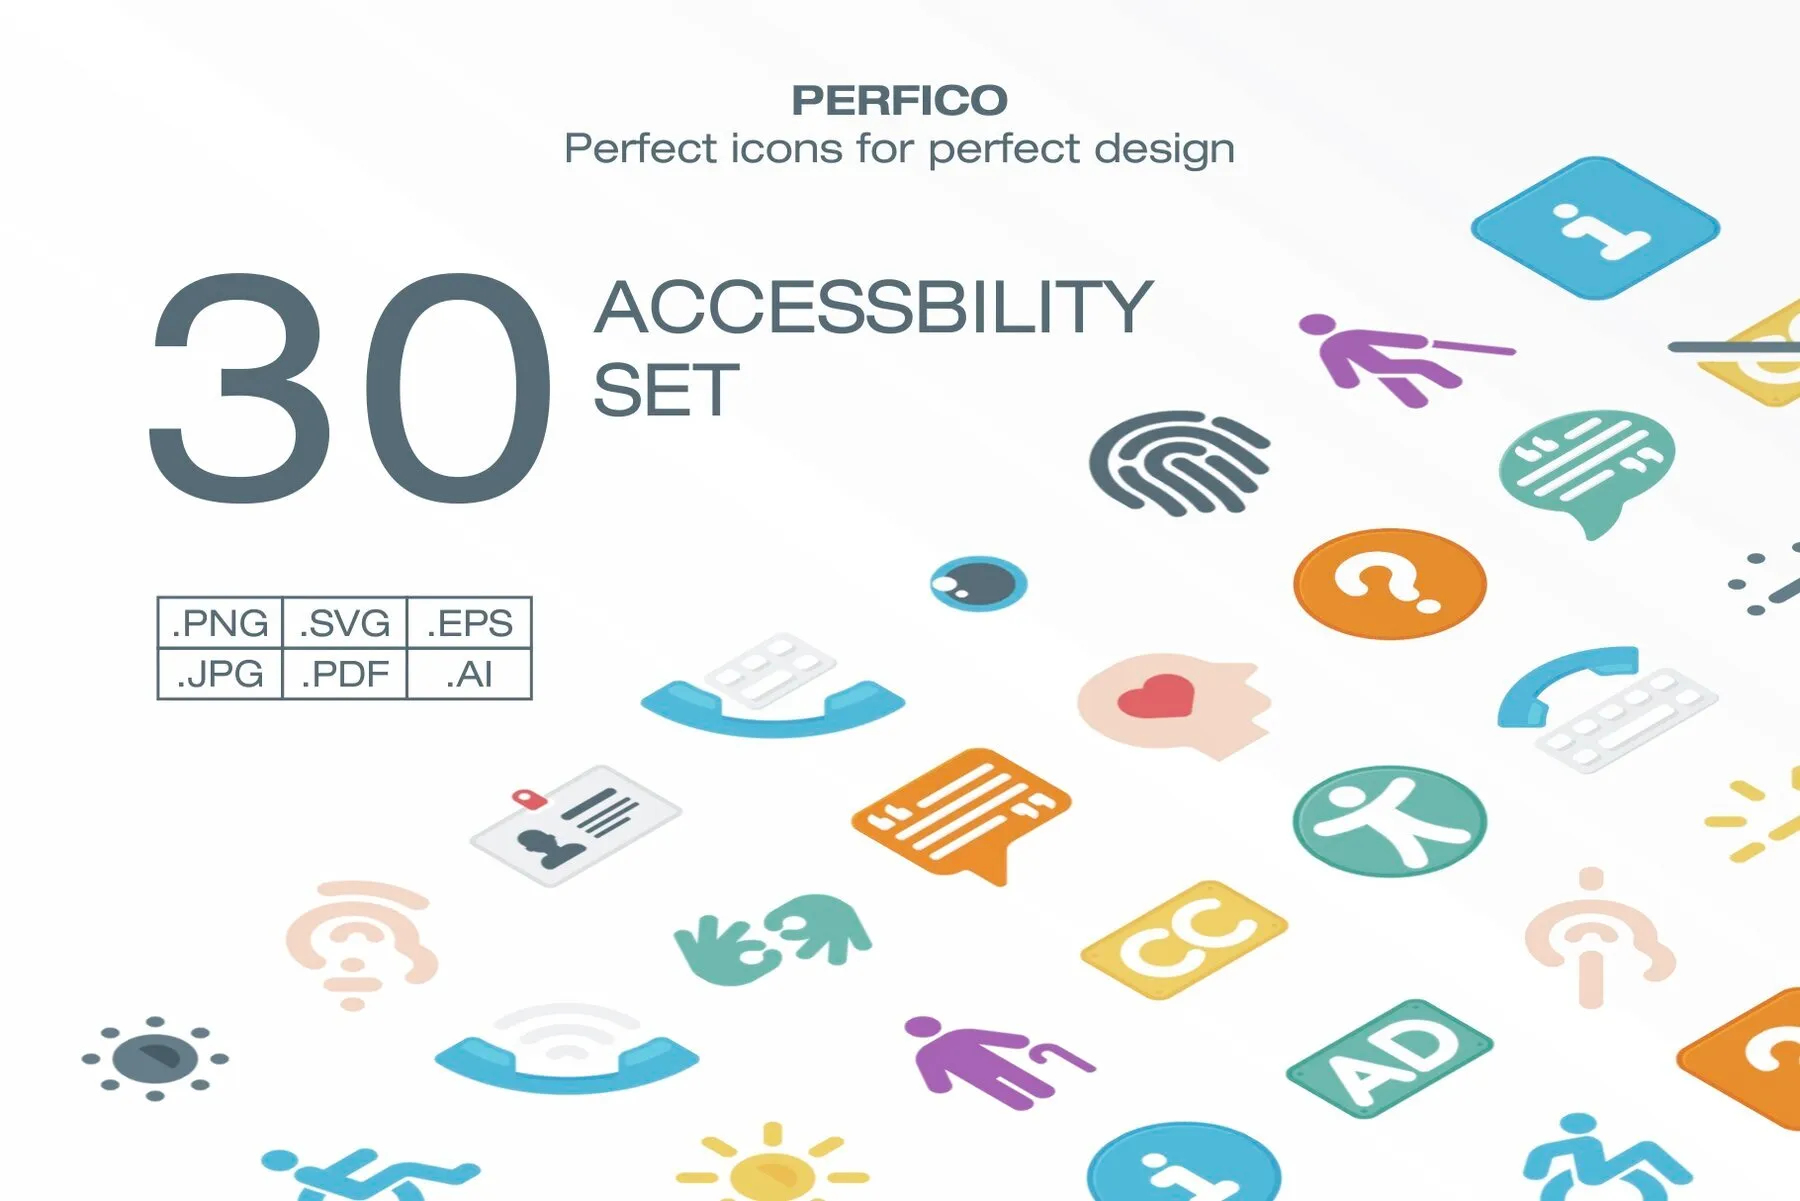 Perfico Accessbility icon set